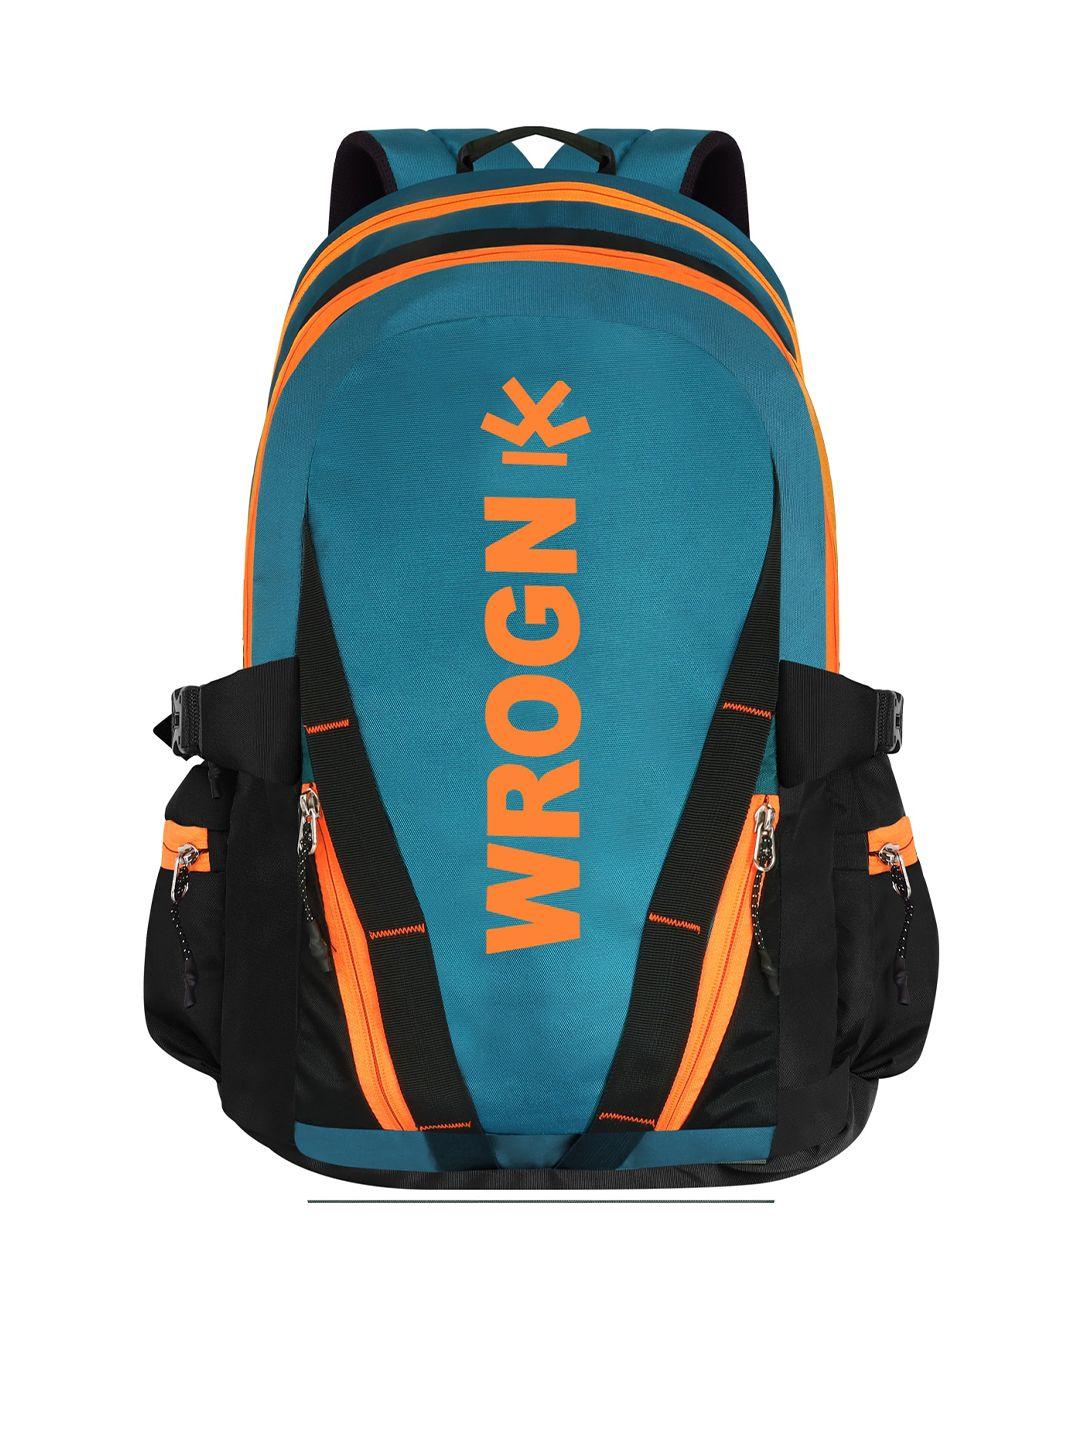 wrogn unisex brand logo printed backpack with rain cover